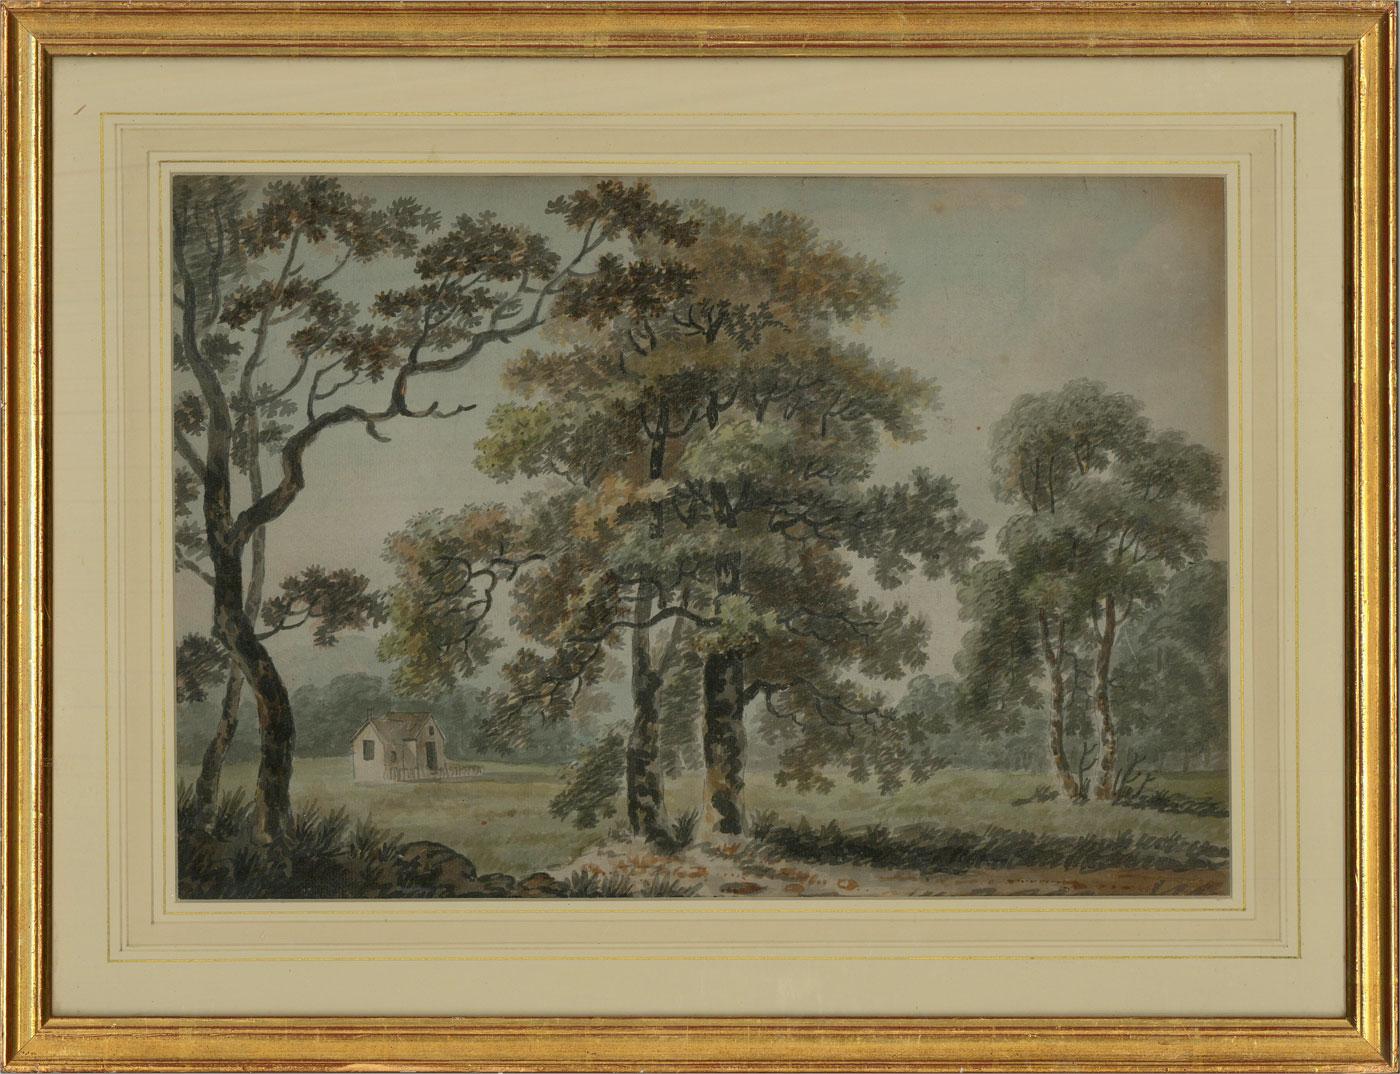 A wonderful English landscape in watercolour showing a small house in the middle of a meadow clearing, surrounded by tall trees. executed by an obvious follower of Paul Sandby, this scene has the delicate style and composition of Sandby's own work